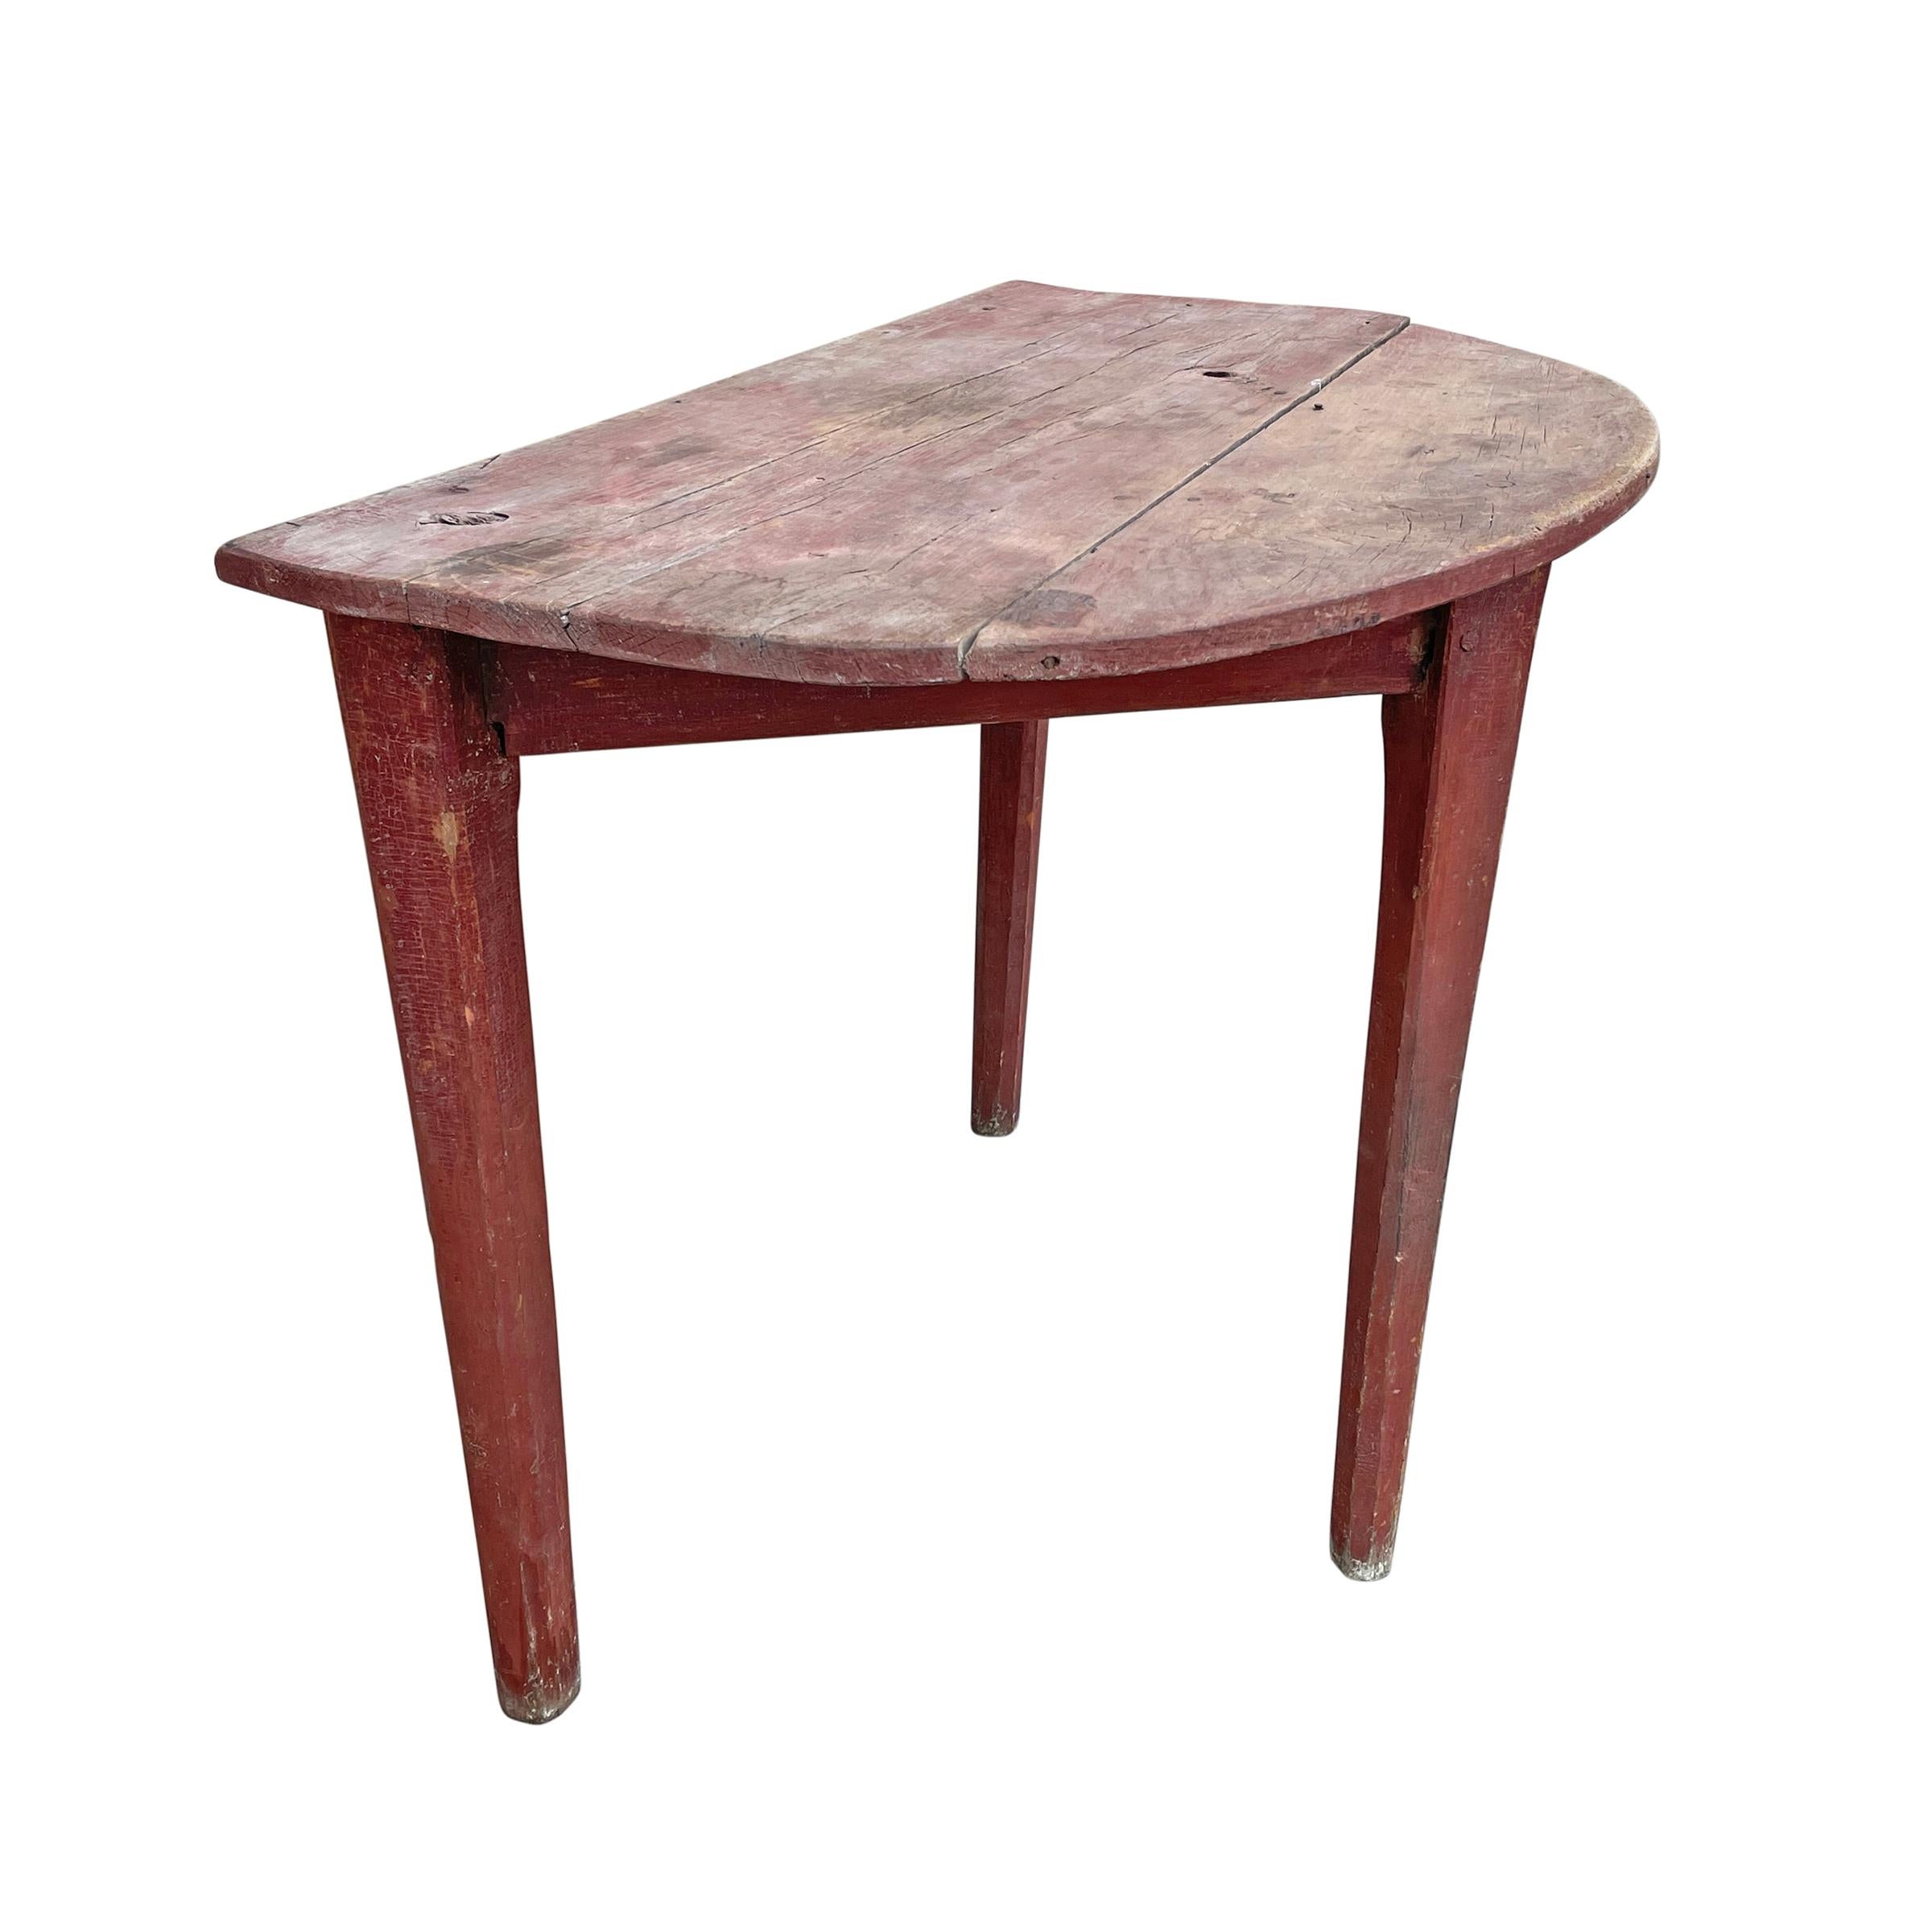 Painted 19th Century American Demilune Table